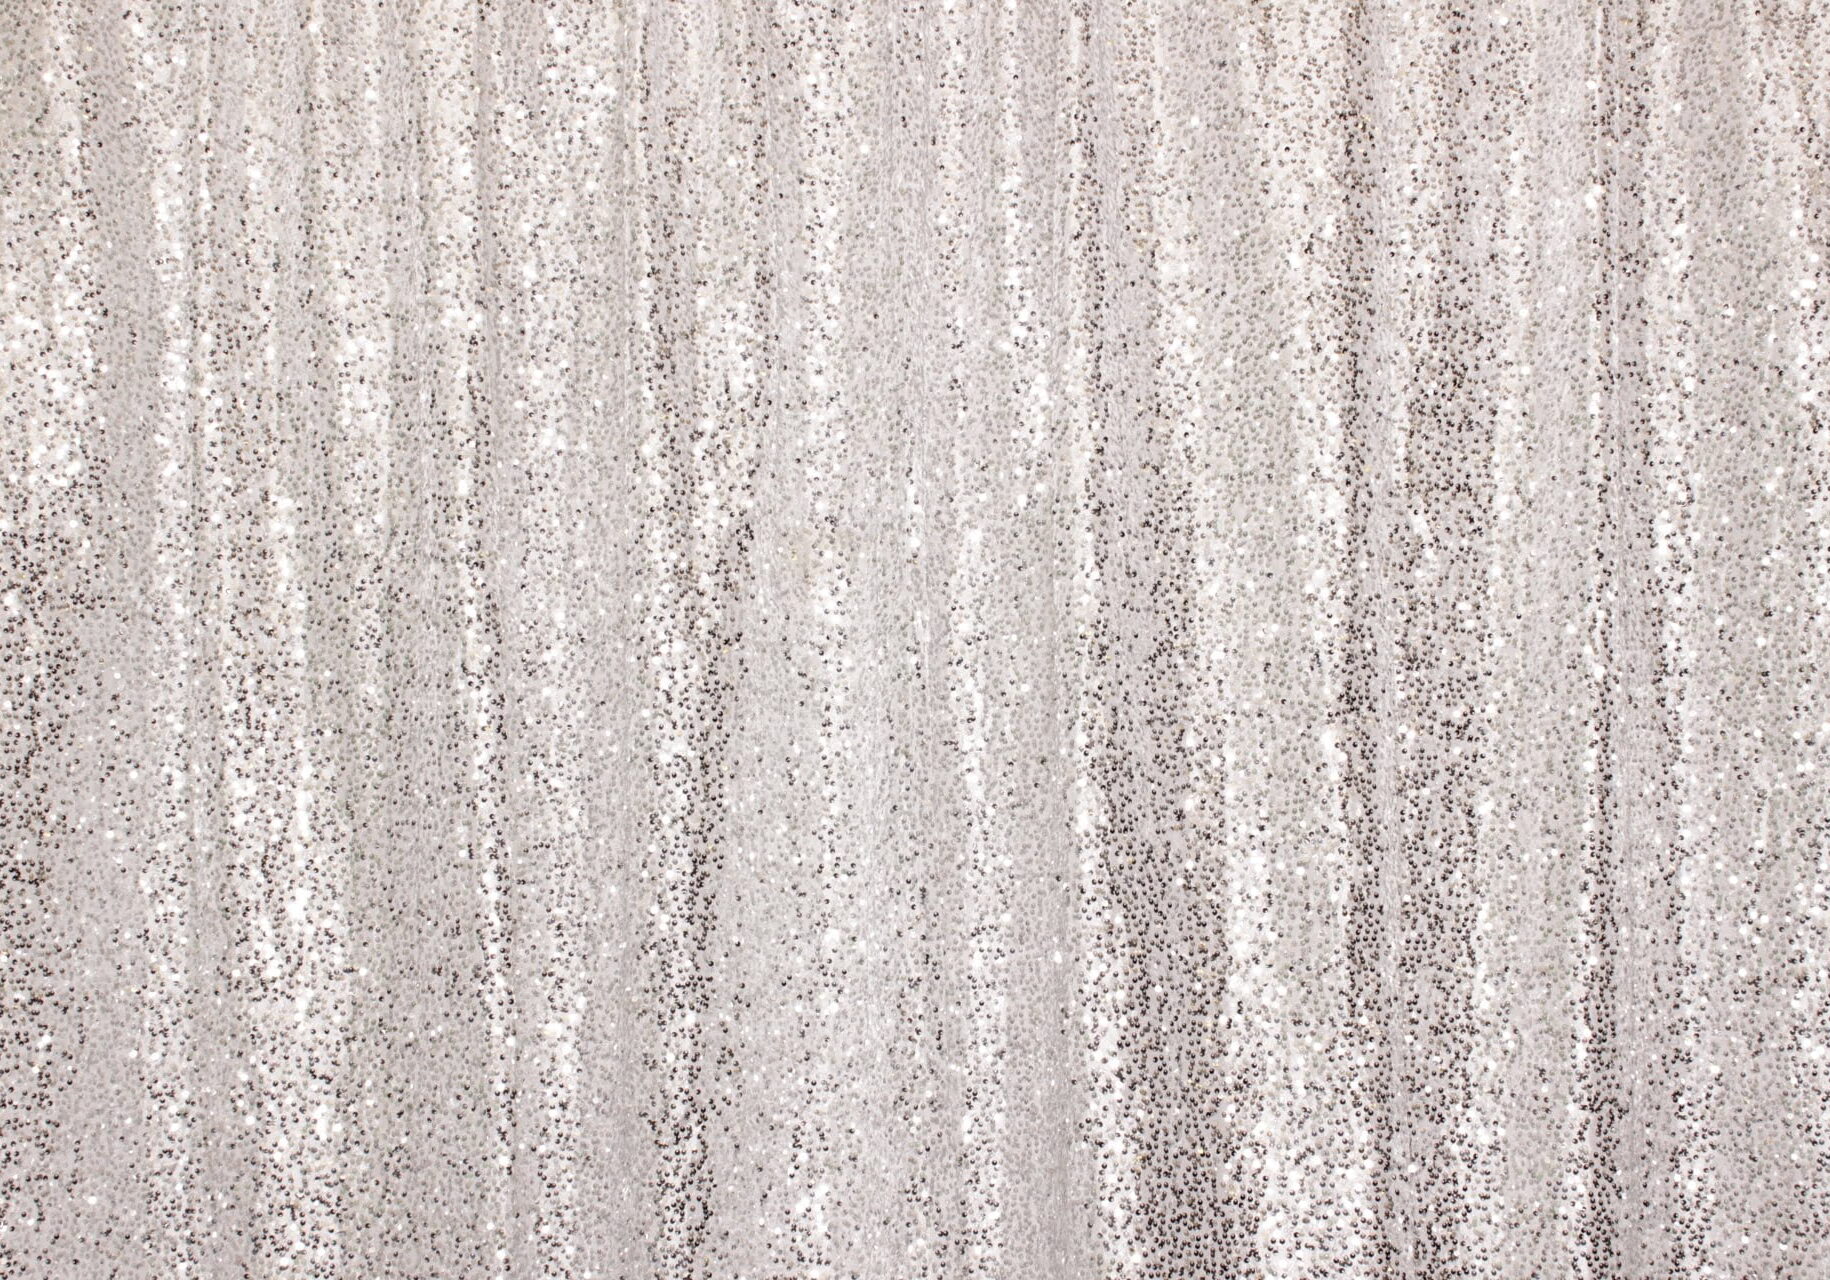 Fizzy_Cat_Photo_Booth_backdrop_Silver_Sequin